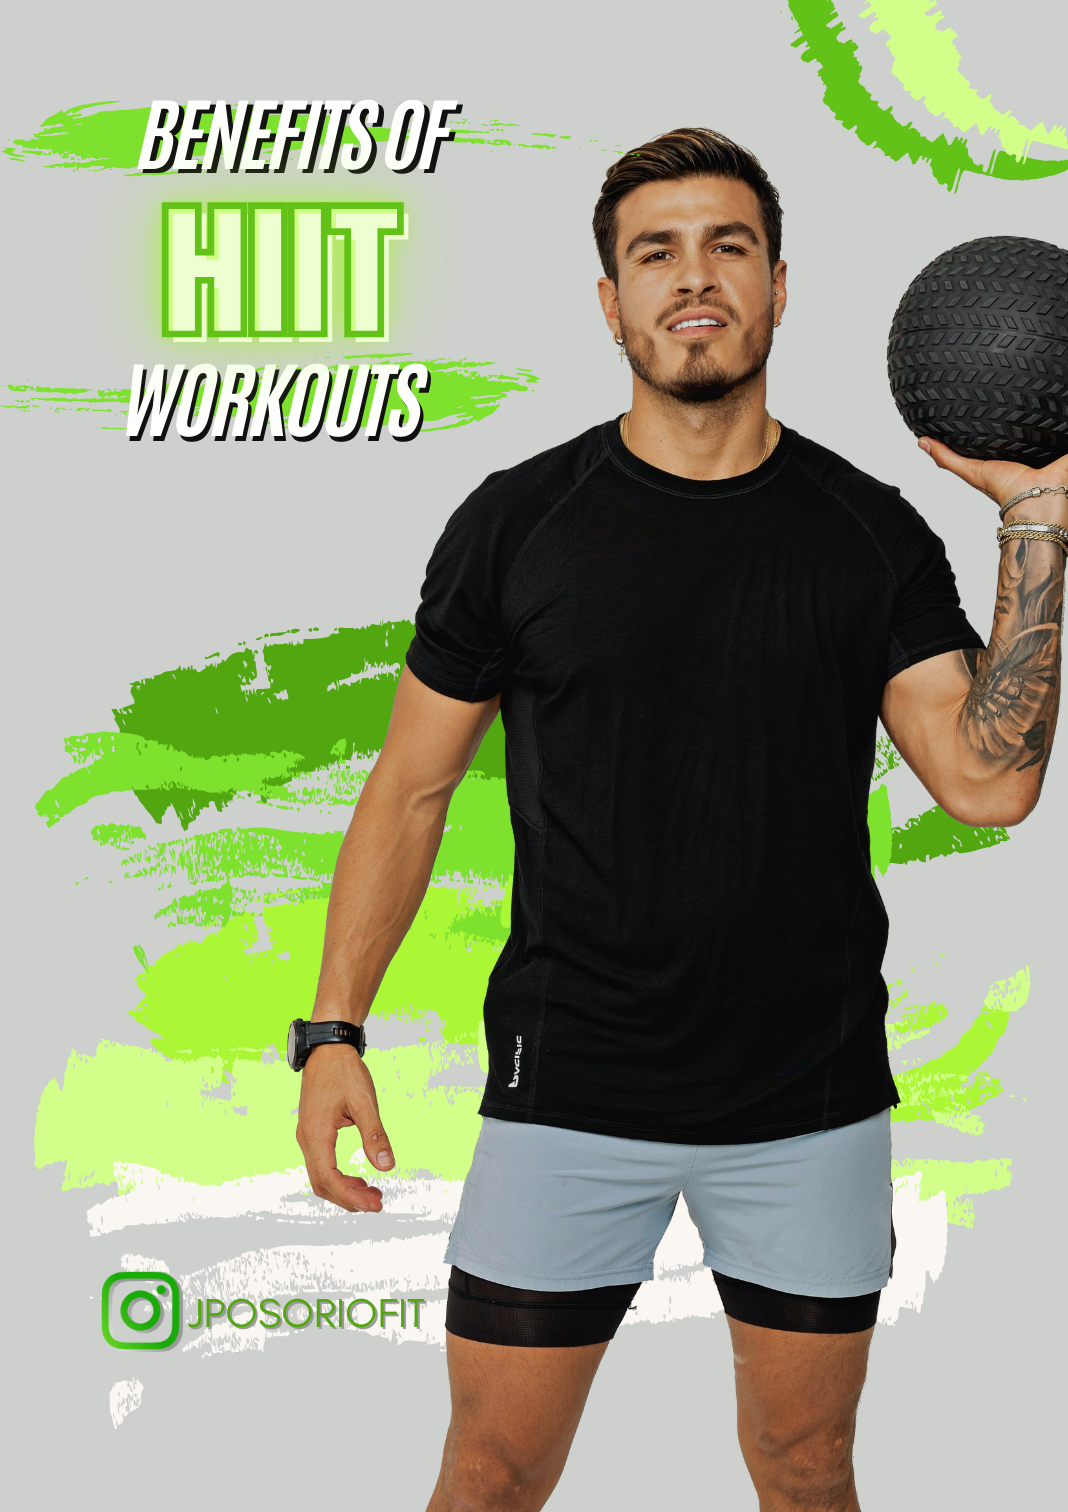 The Benefits of HIIT Workouts